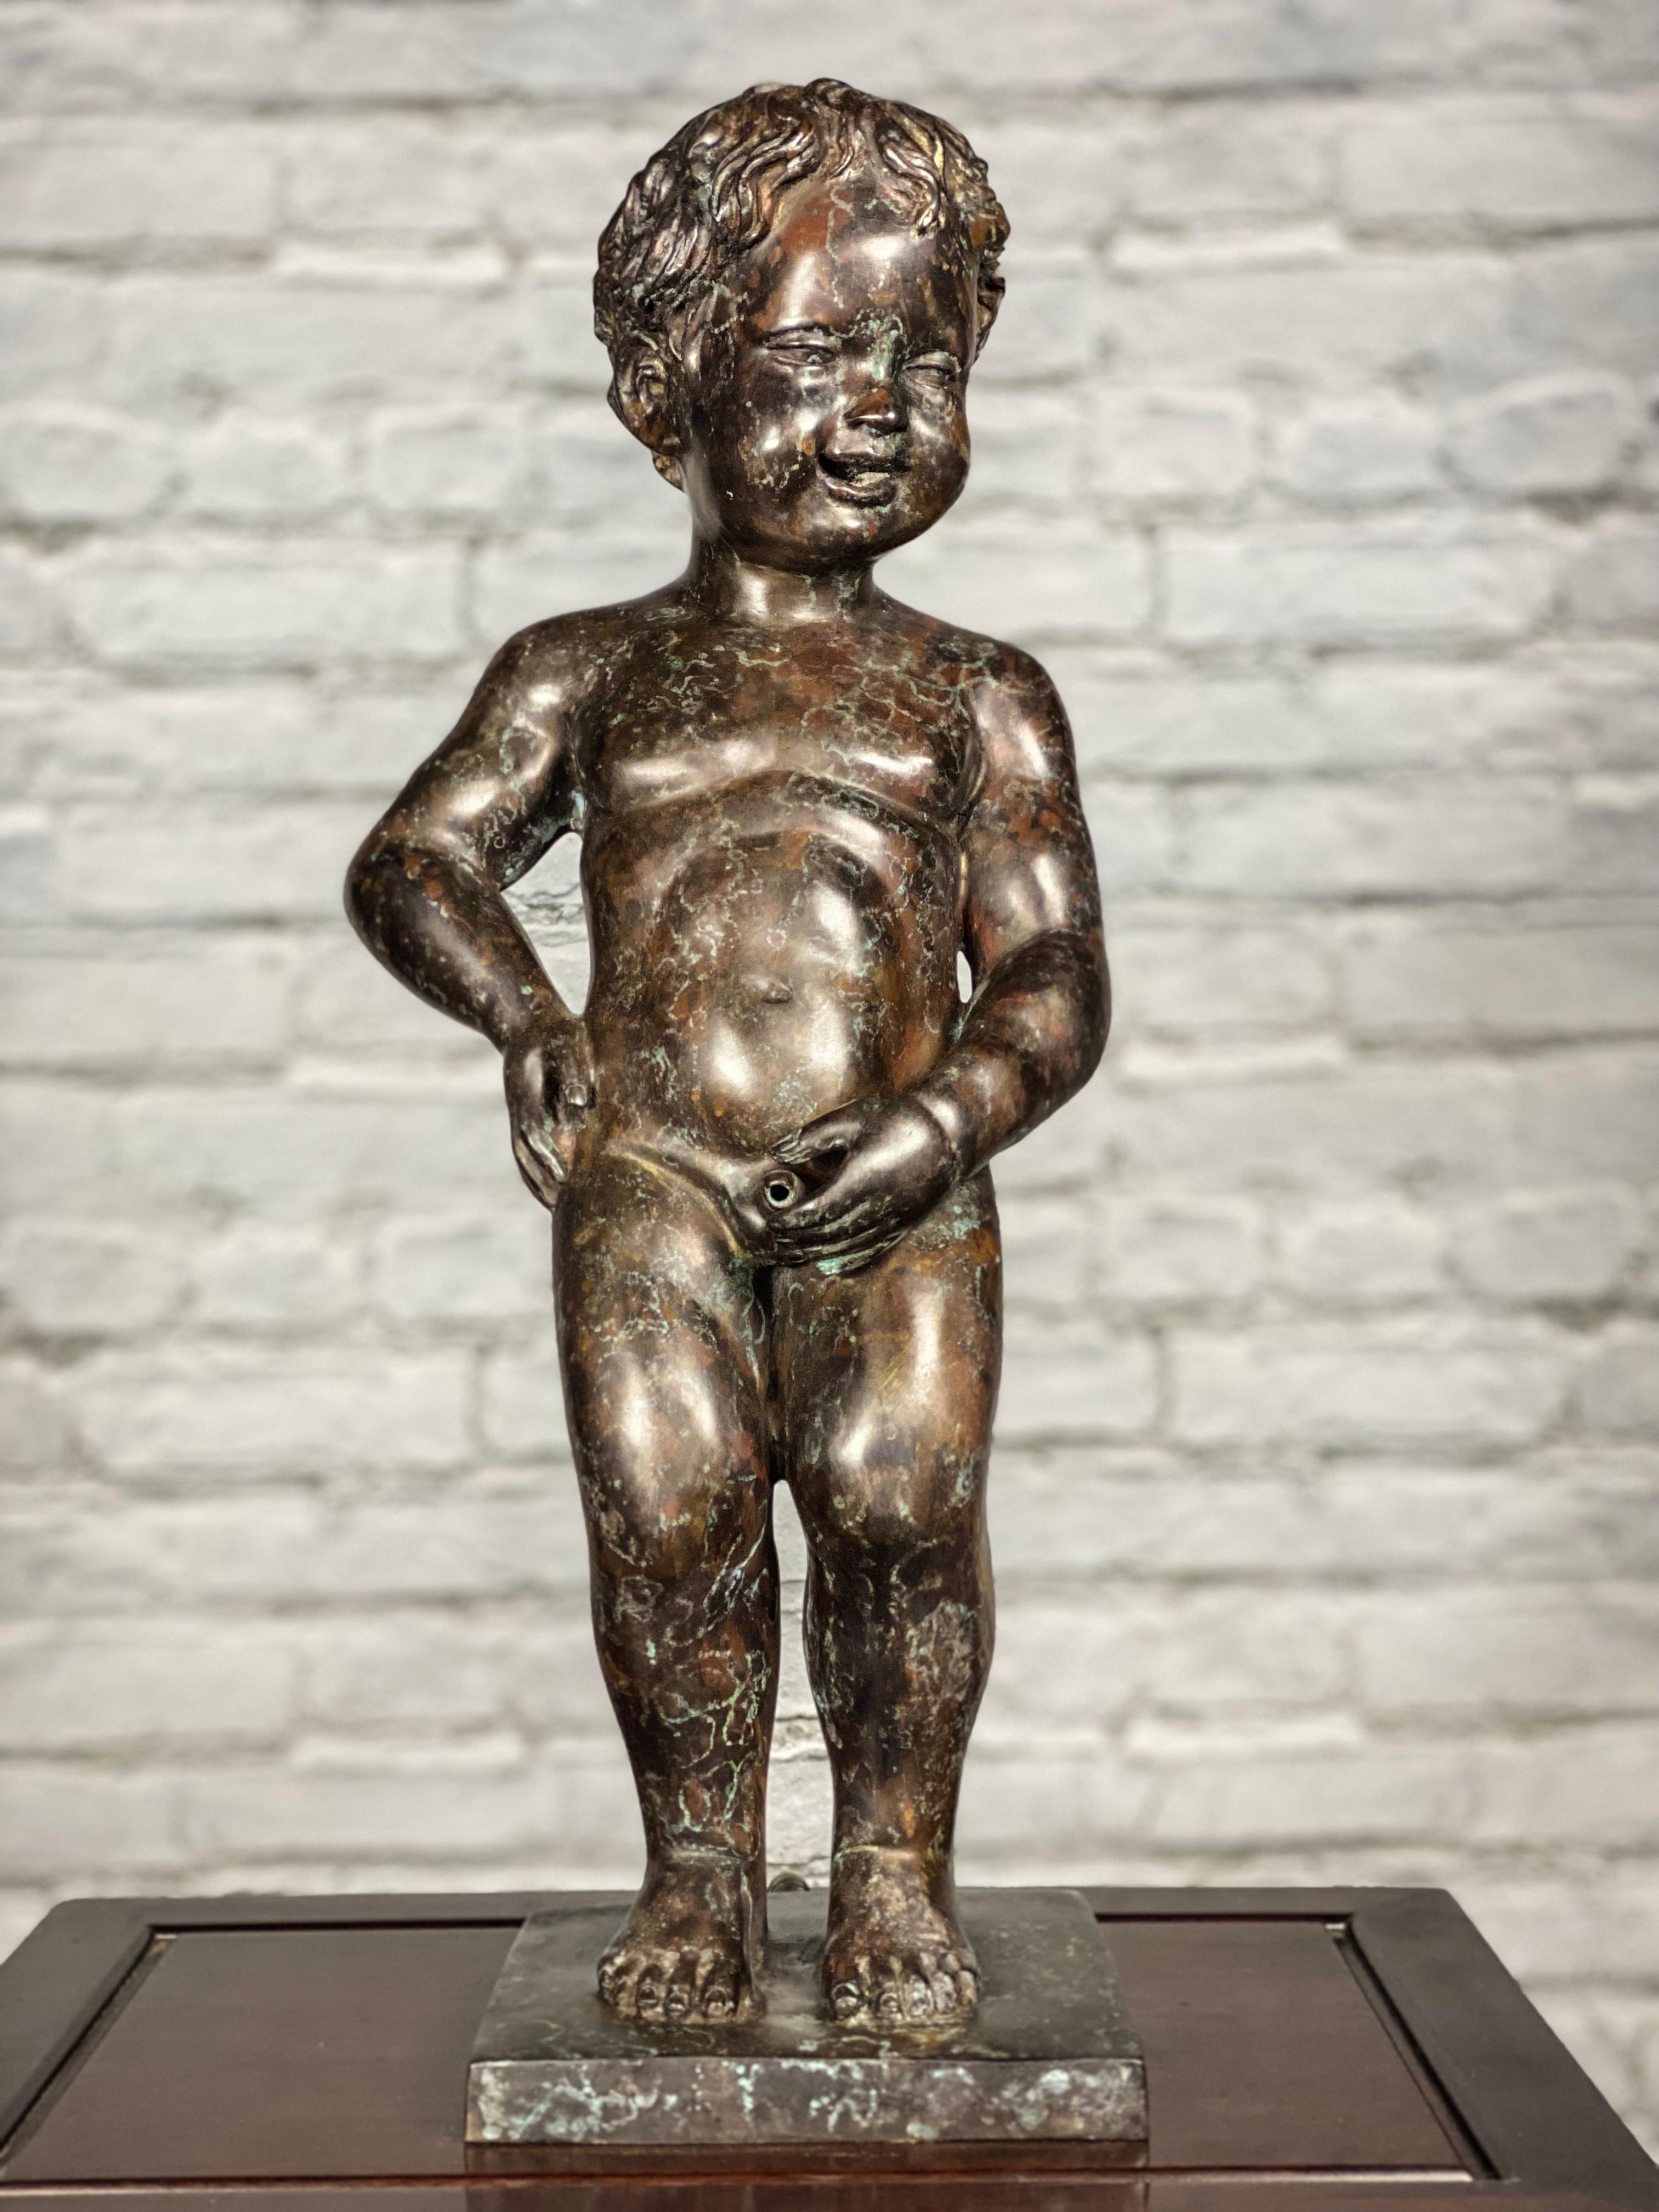 Looking for a fun and quirky garden statue? Look no further than our Boy Peeing Small Bronze Fountain! Cast of bronze by the lost wax process, this little antique like Greco-Roman style cherub makes the perfect addition to any garden or courtyard.